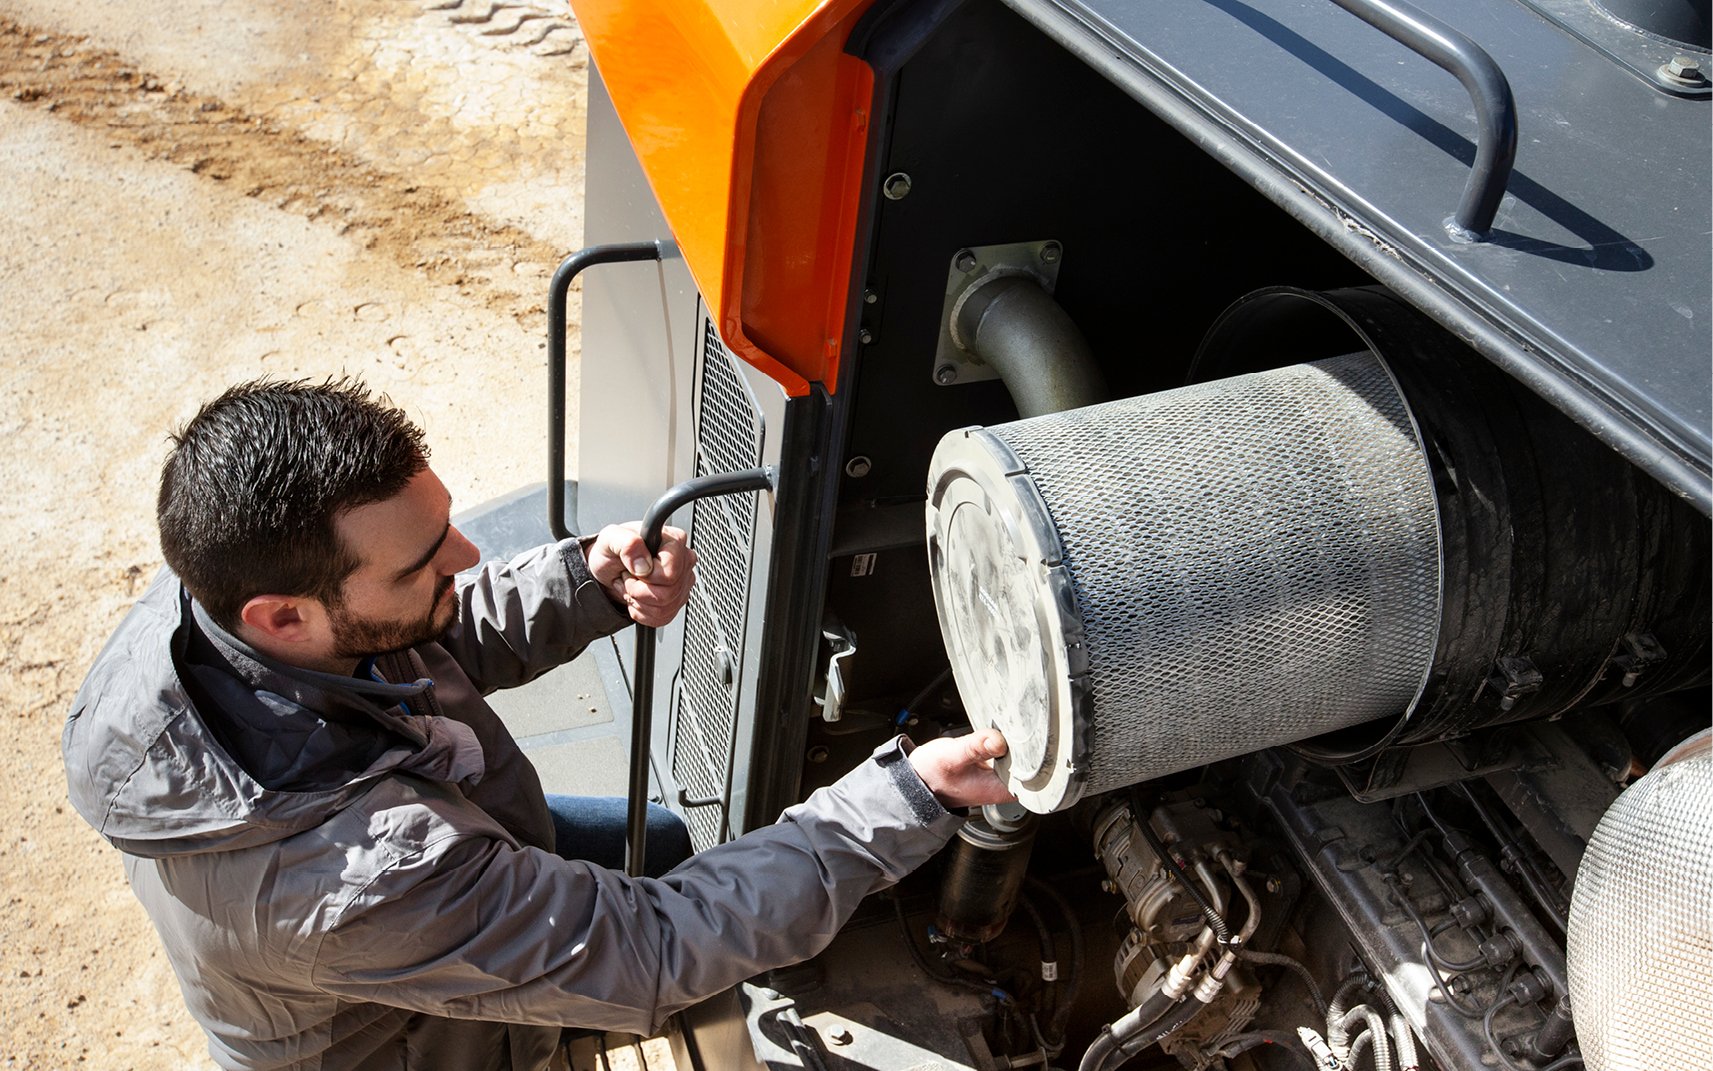 An operator performs preventive maintenance by changing a filter.